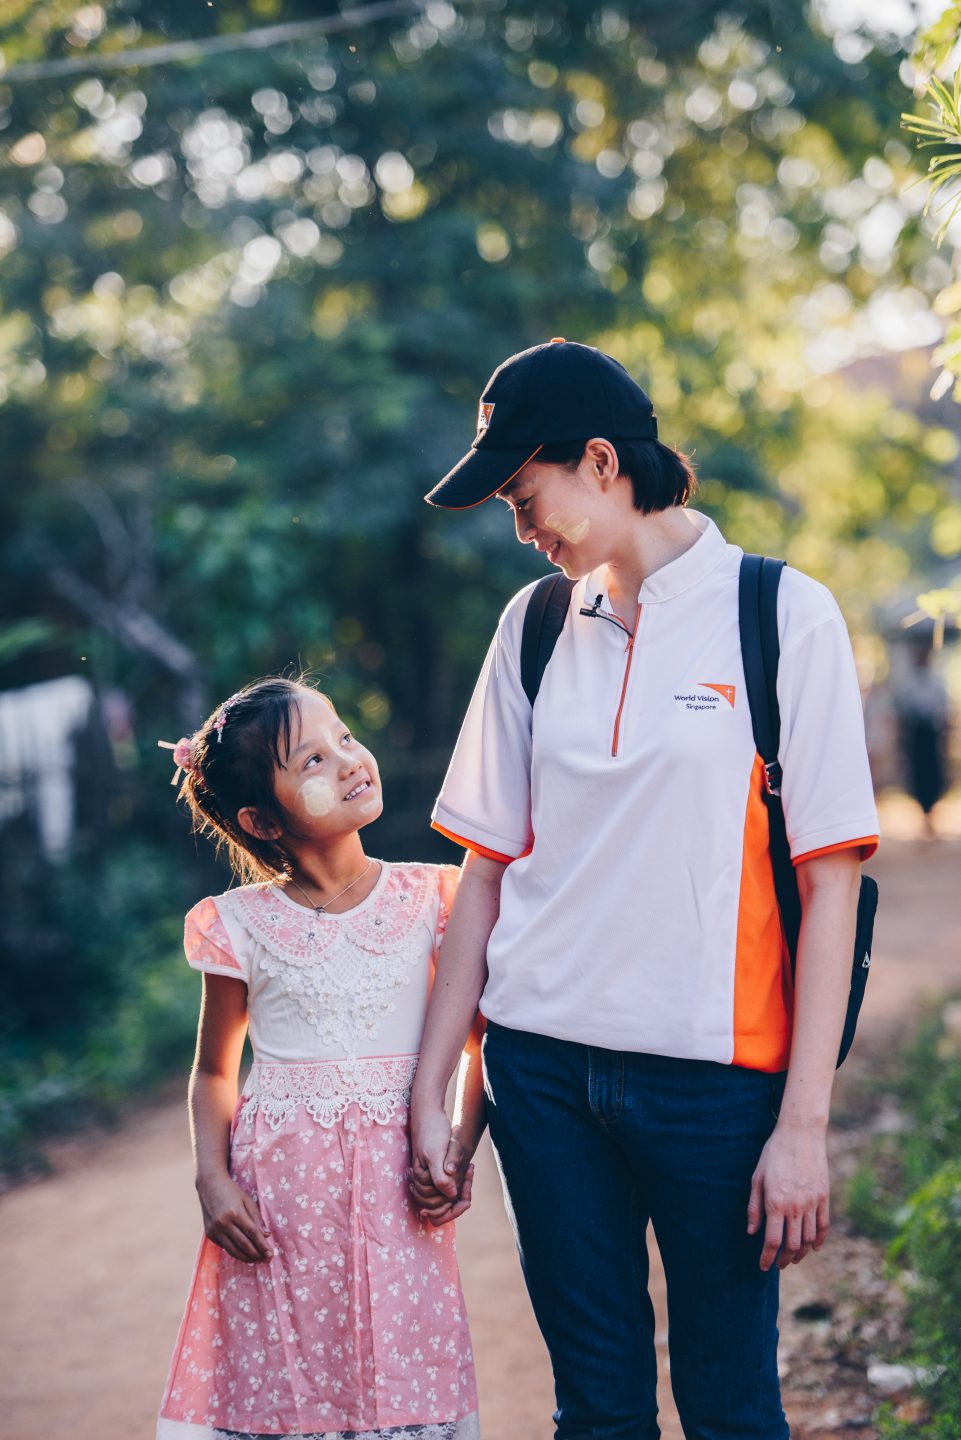 Now an ambassador for World Vision Singapore, she said: "I want to be a vessel of love for Him." She is pictured here with her sponsored children from Myanmar, Kyine Kyine, in a trip last January. Photo courtesy of World Vision Singapore.